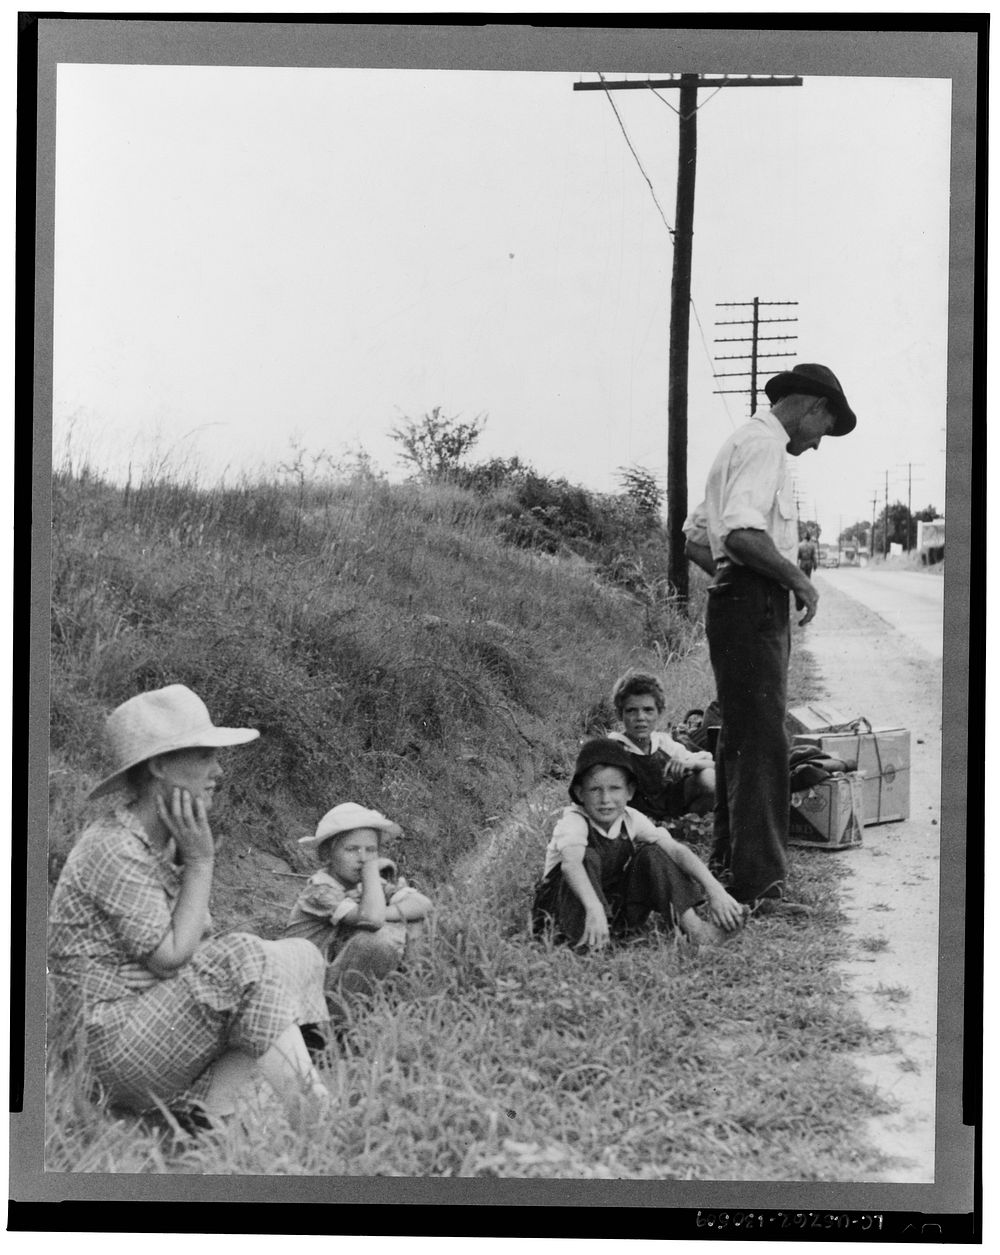 A hitchhiking family waiting along the highway in Macon, Georgia. The father repairs sewing machines, lawn mowers, etc. He…